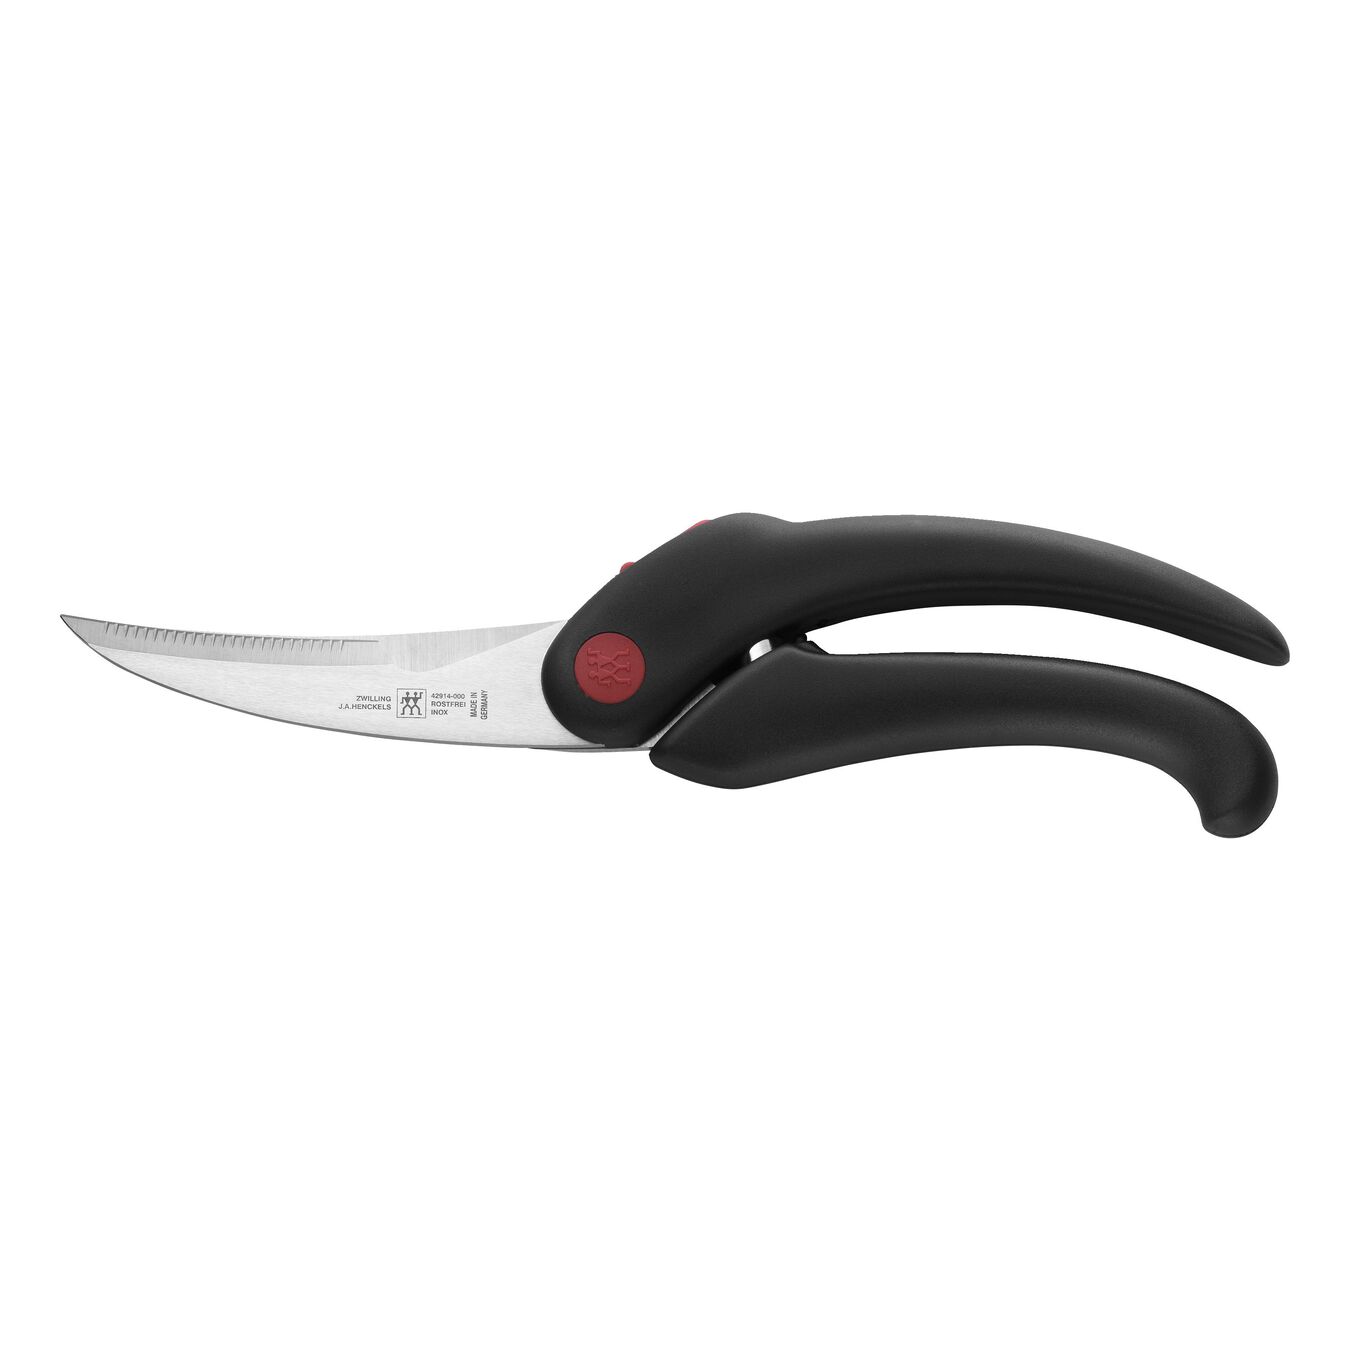 Deluxe Poultry Shears - Serrated Edge,,large 2